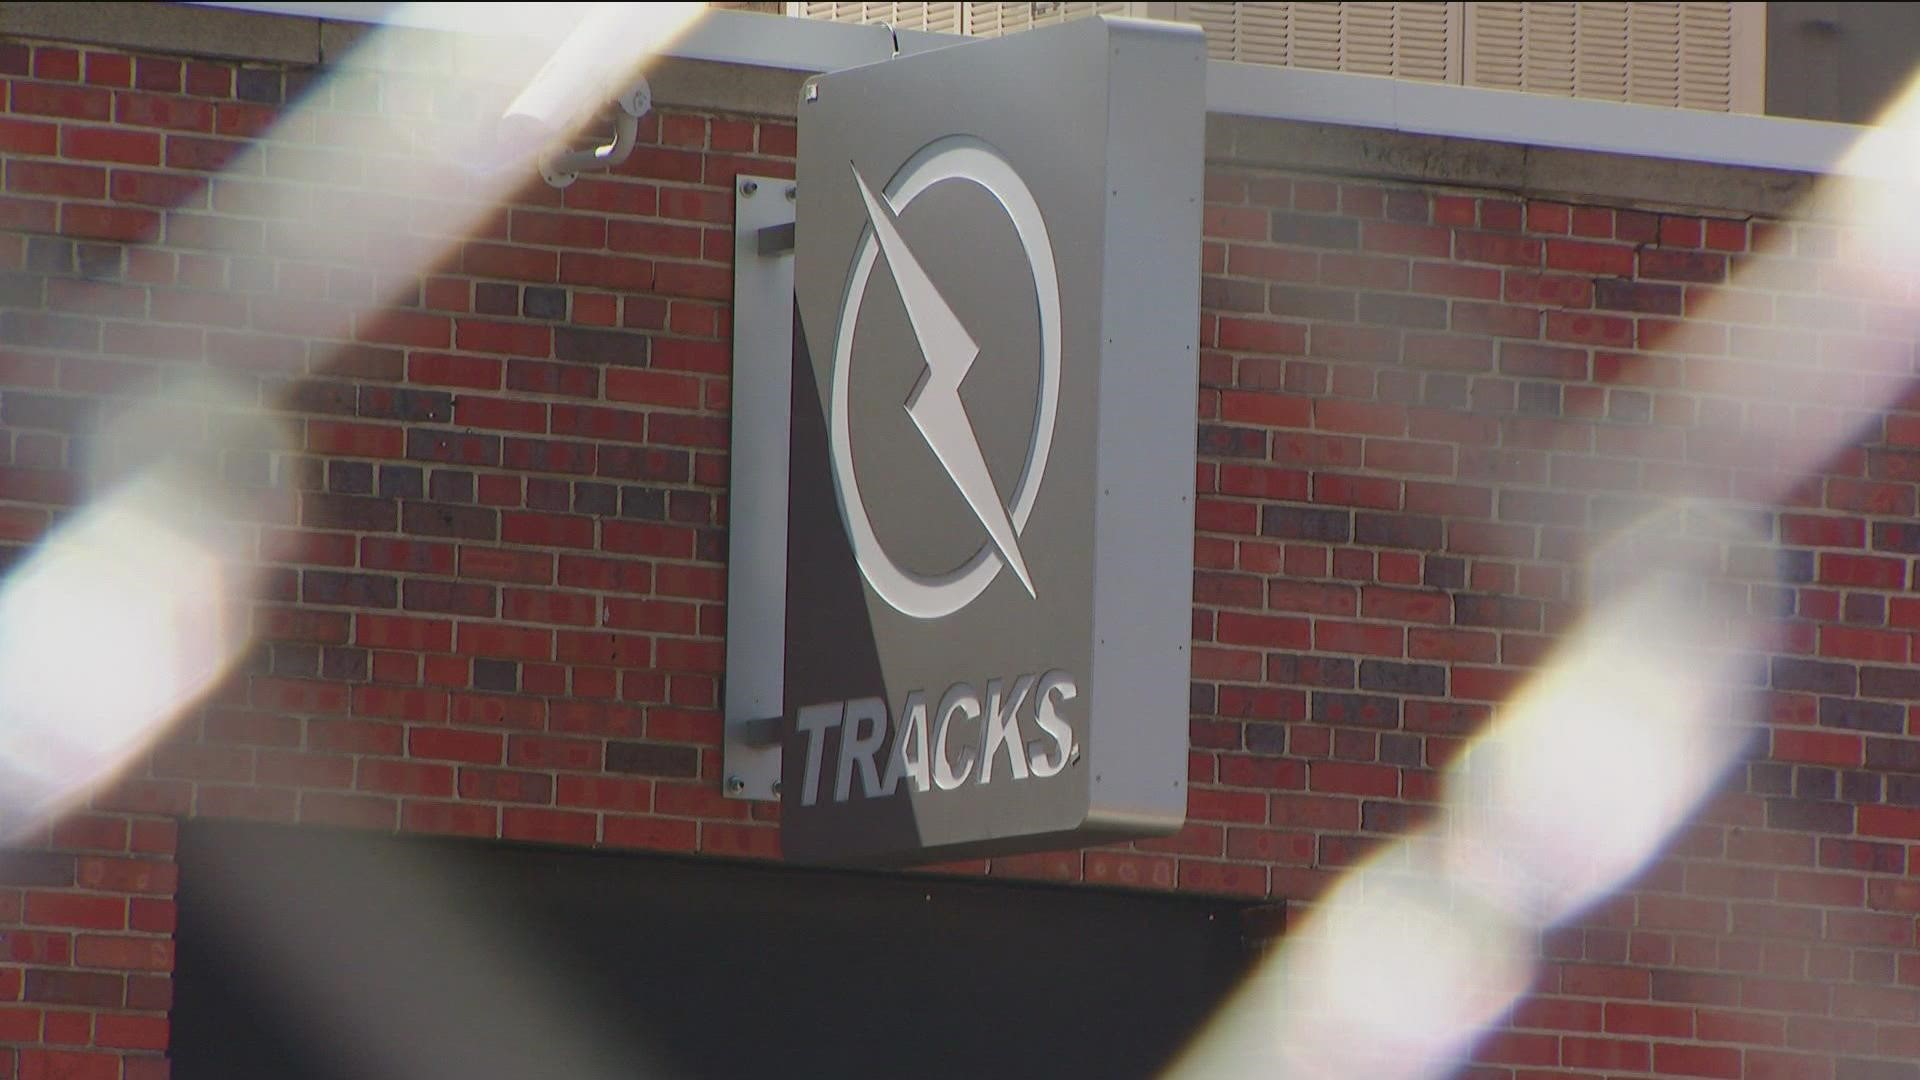 Tracks, the iconic LGBTQ club, has an unusual backstory. It caught the eye of filmmaker Shawna Schultz, who decided to create "Making Tracks."